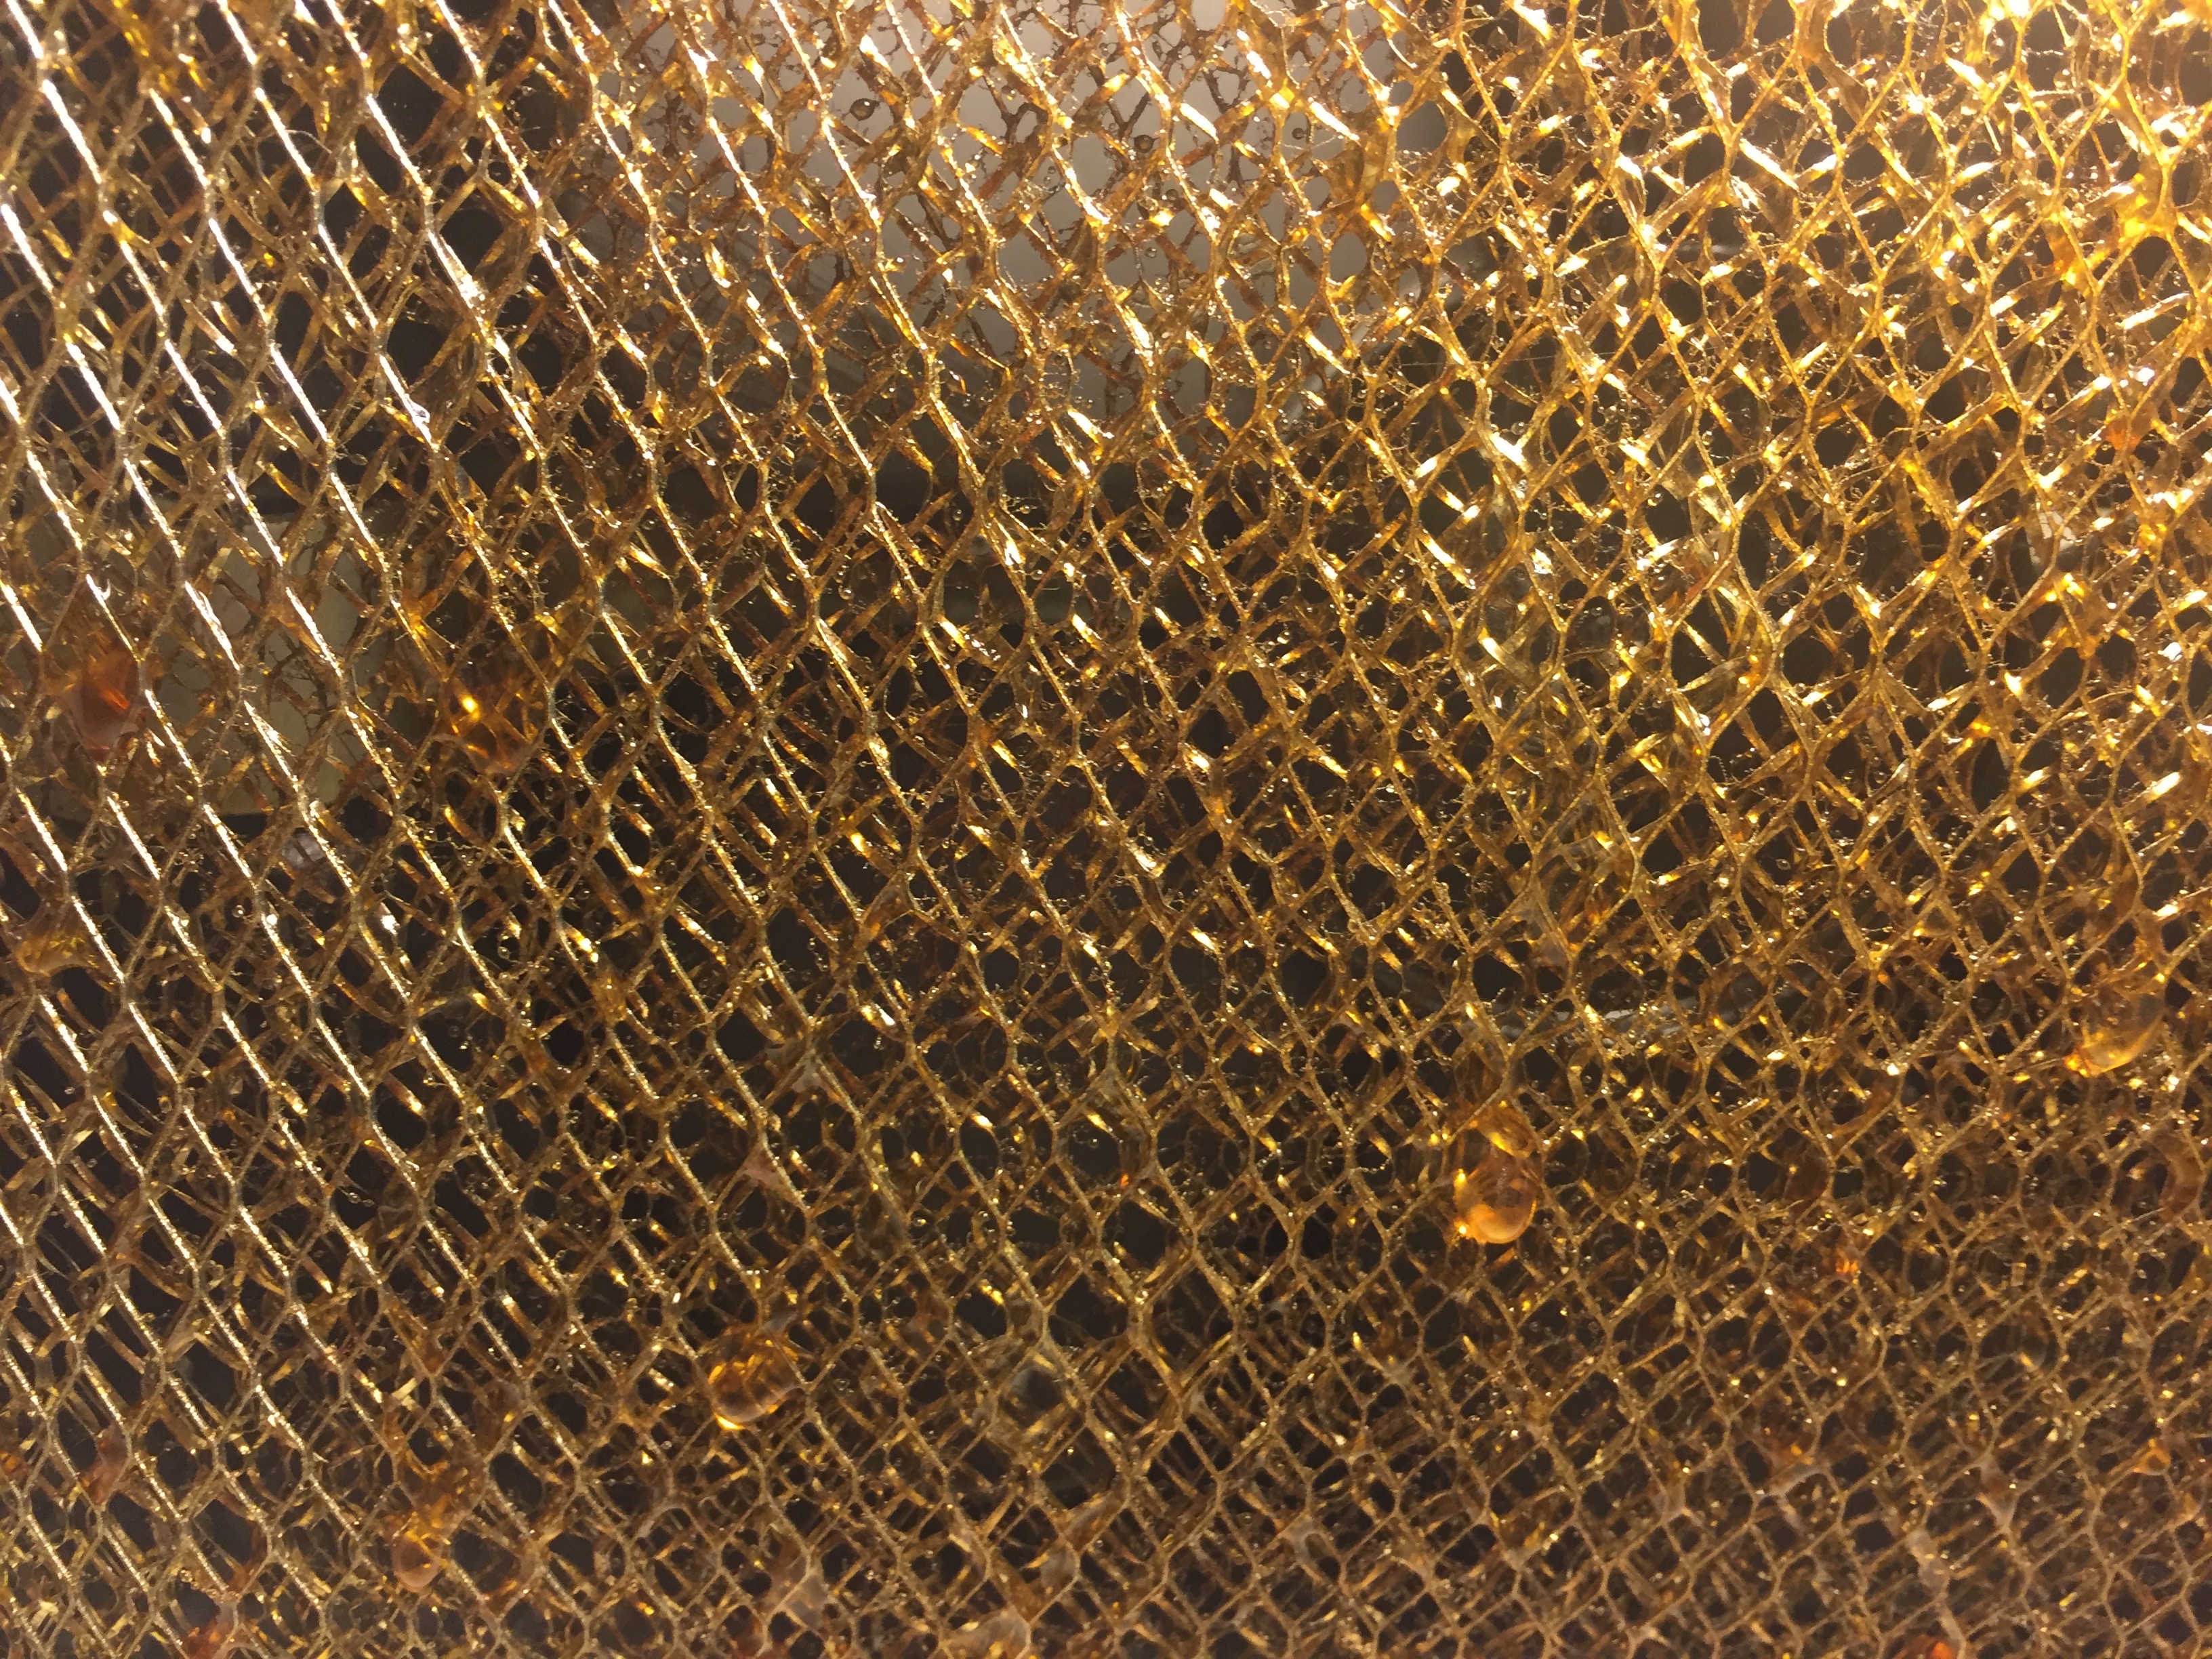 Layers of brass mesh with golden sap